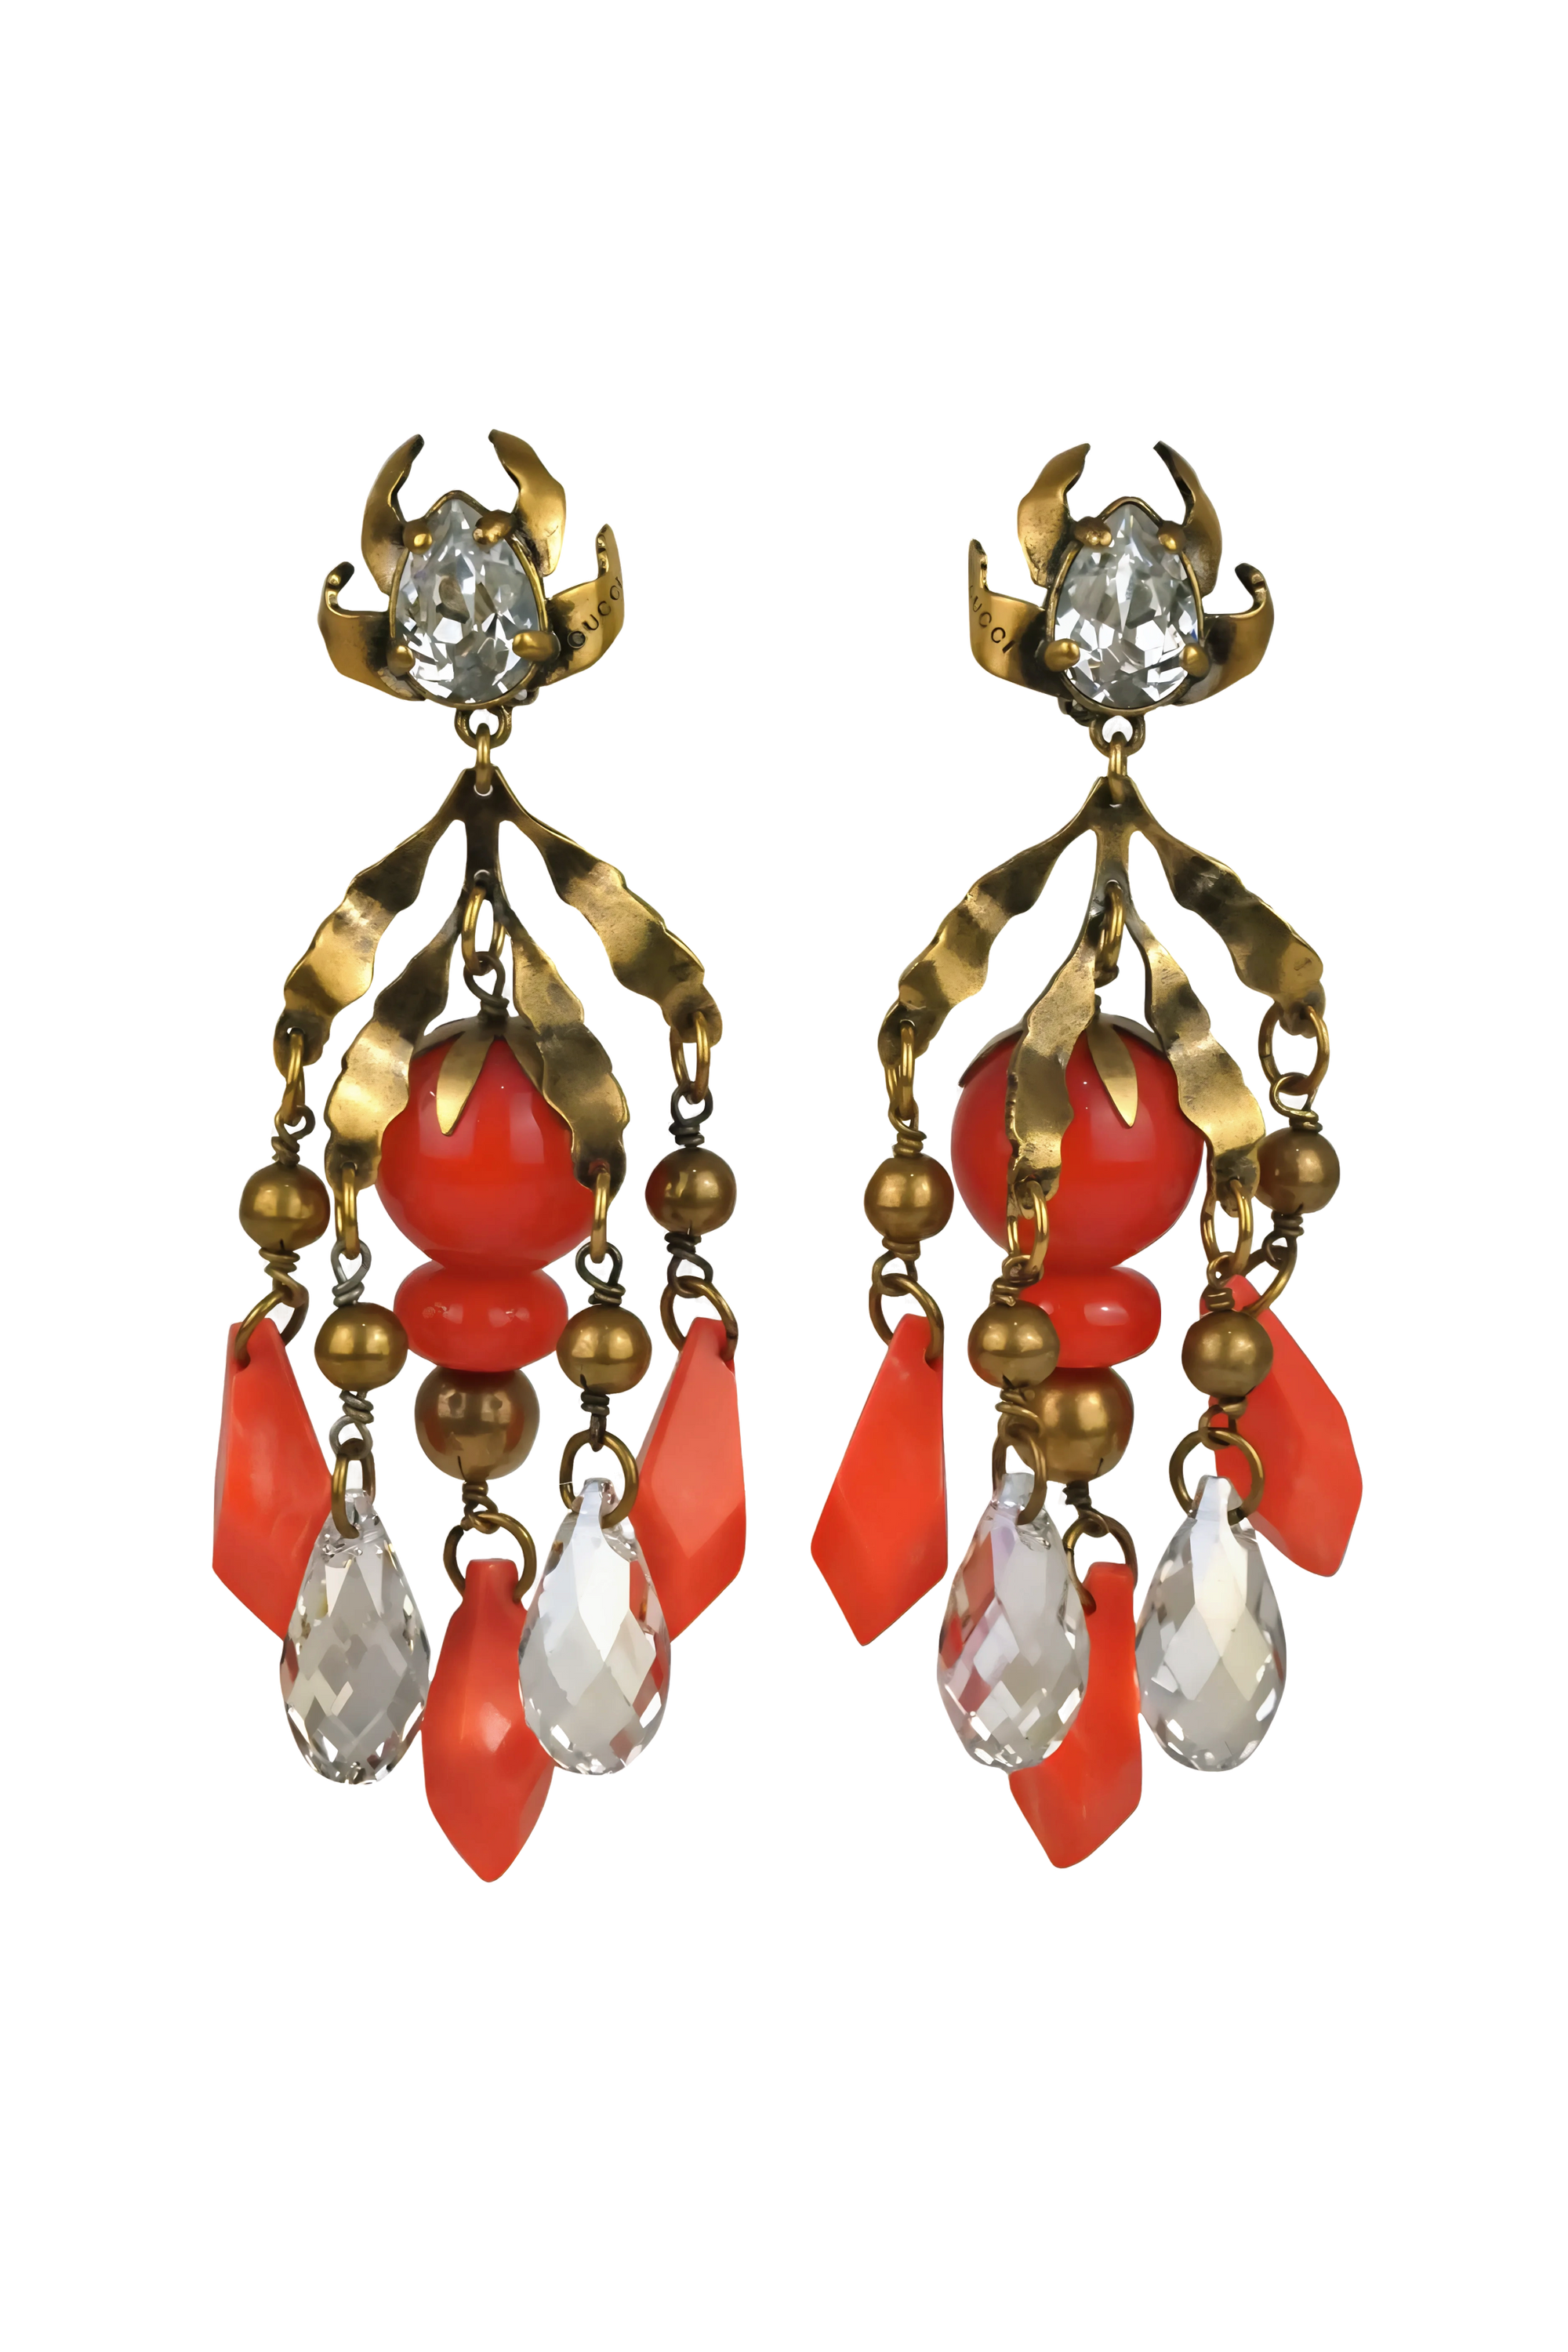 Gucci Crystal & Coral Bead Chandelier Earrings - Foxy Couture Carmel